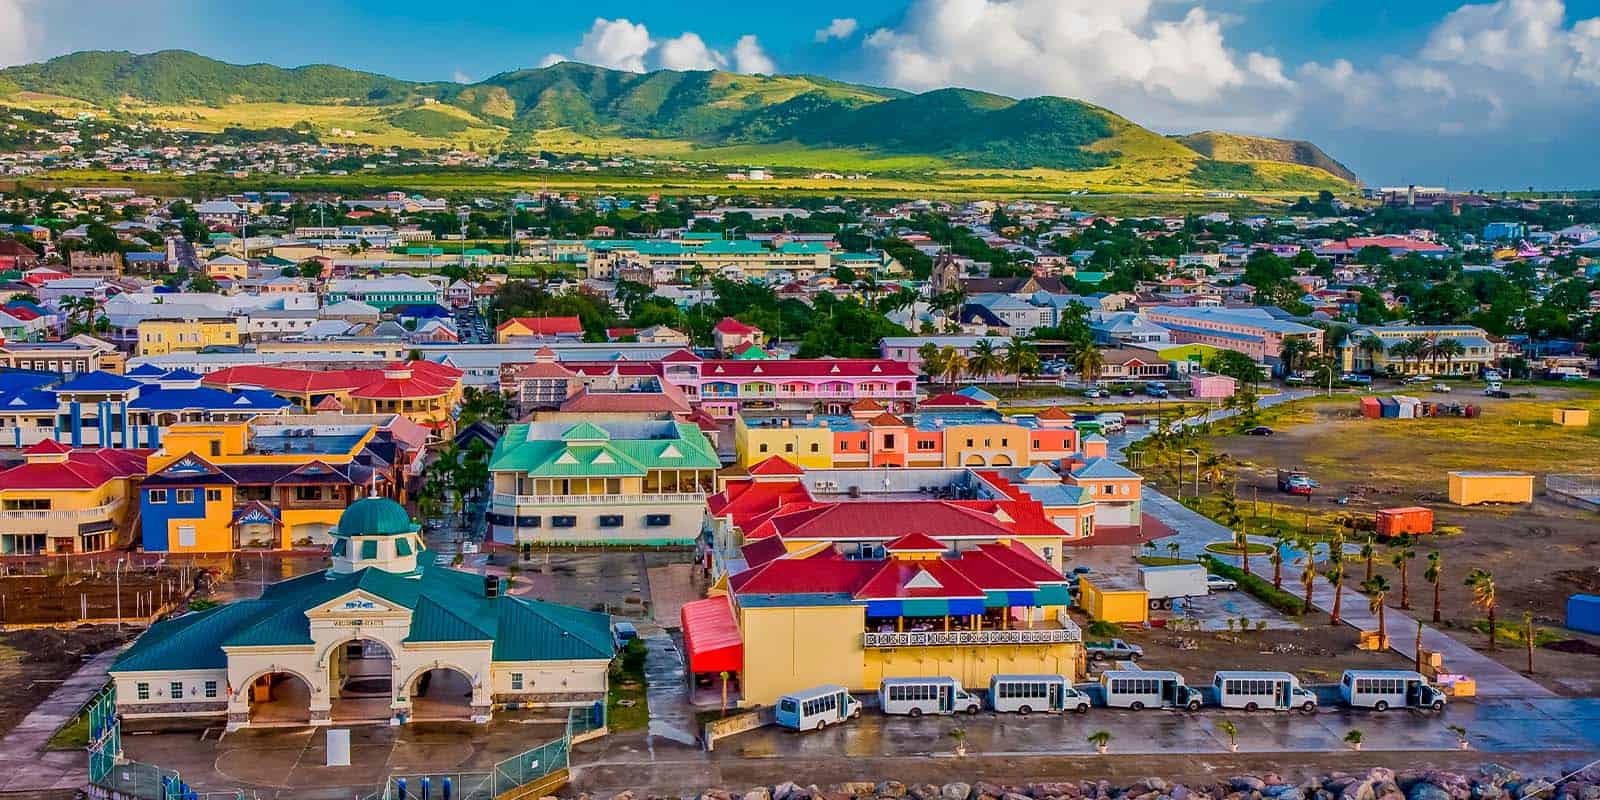 Future of Bitcoin Trading in Saint Kitts and Nevis